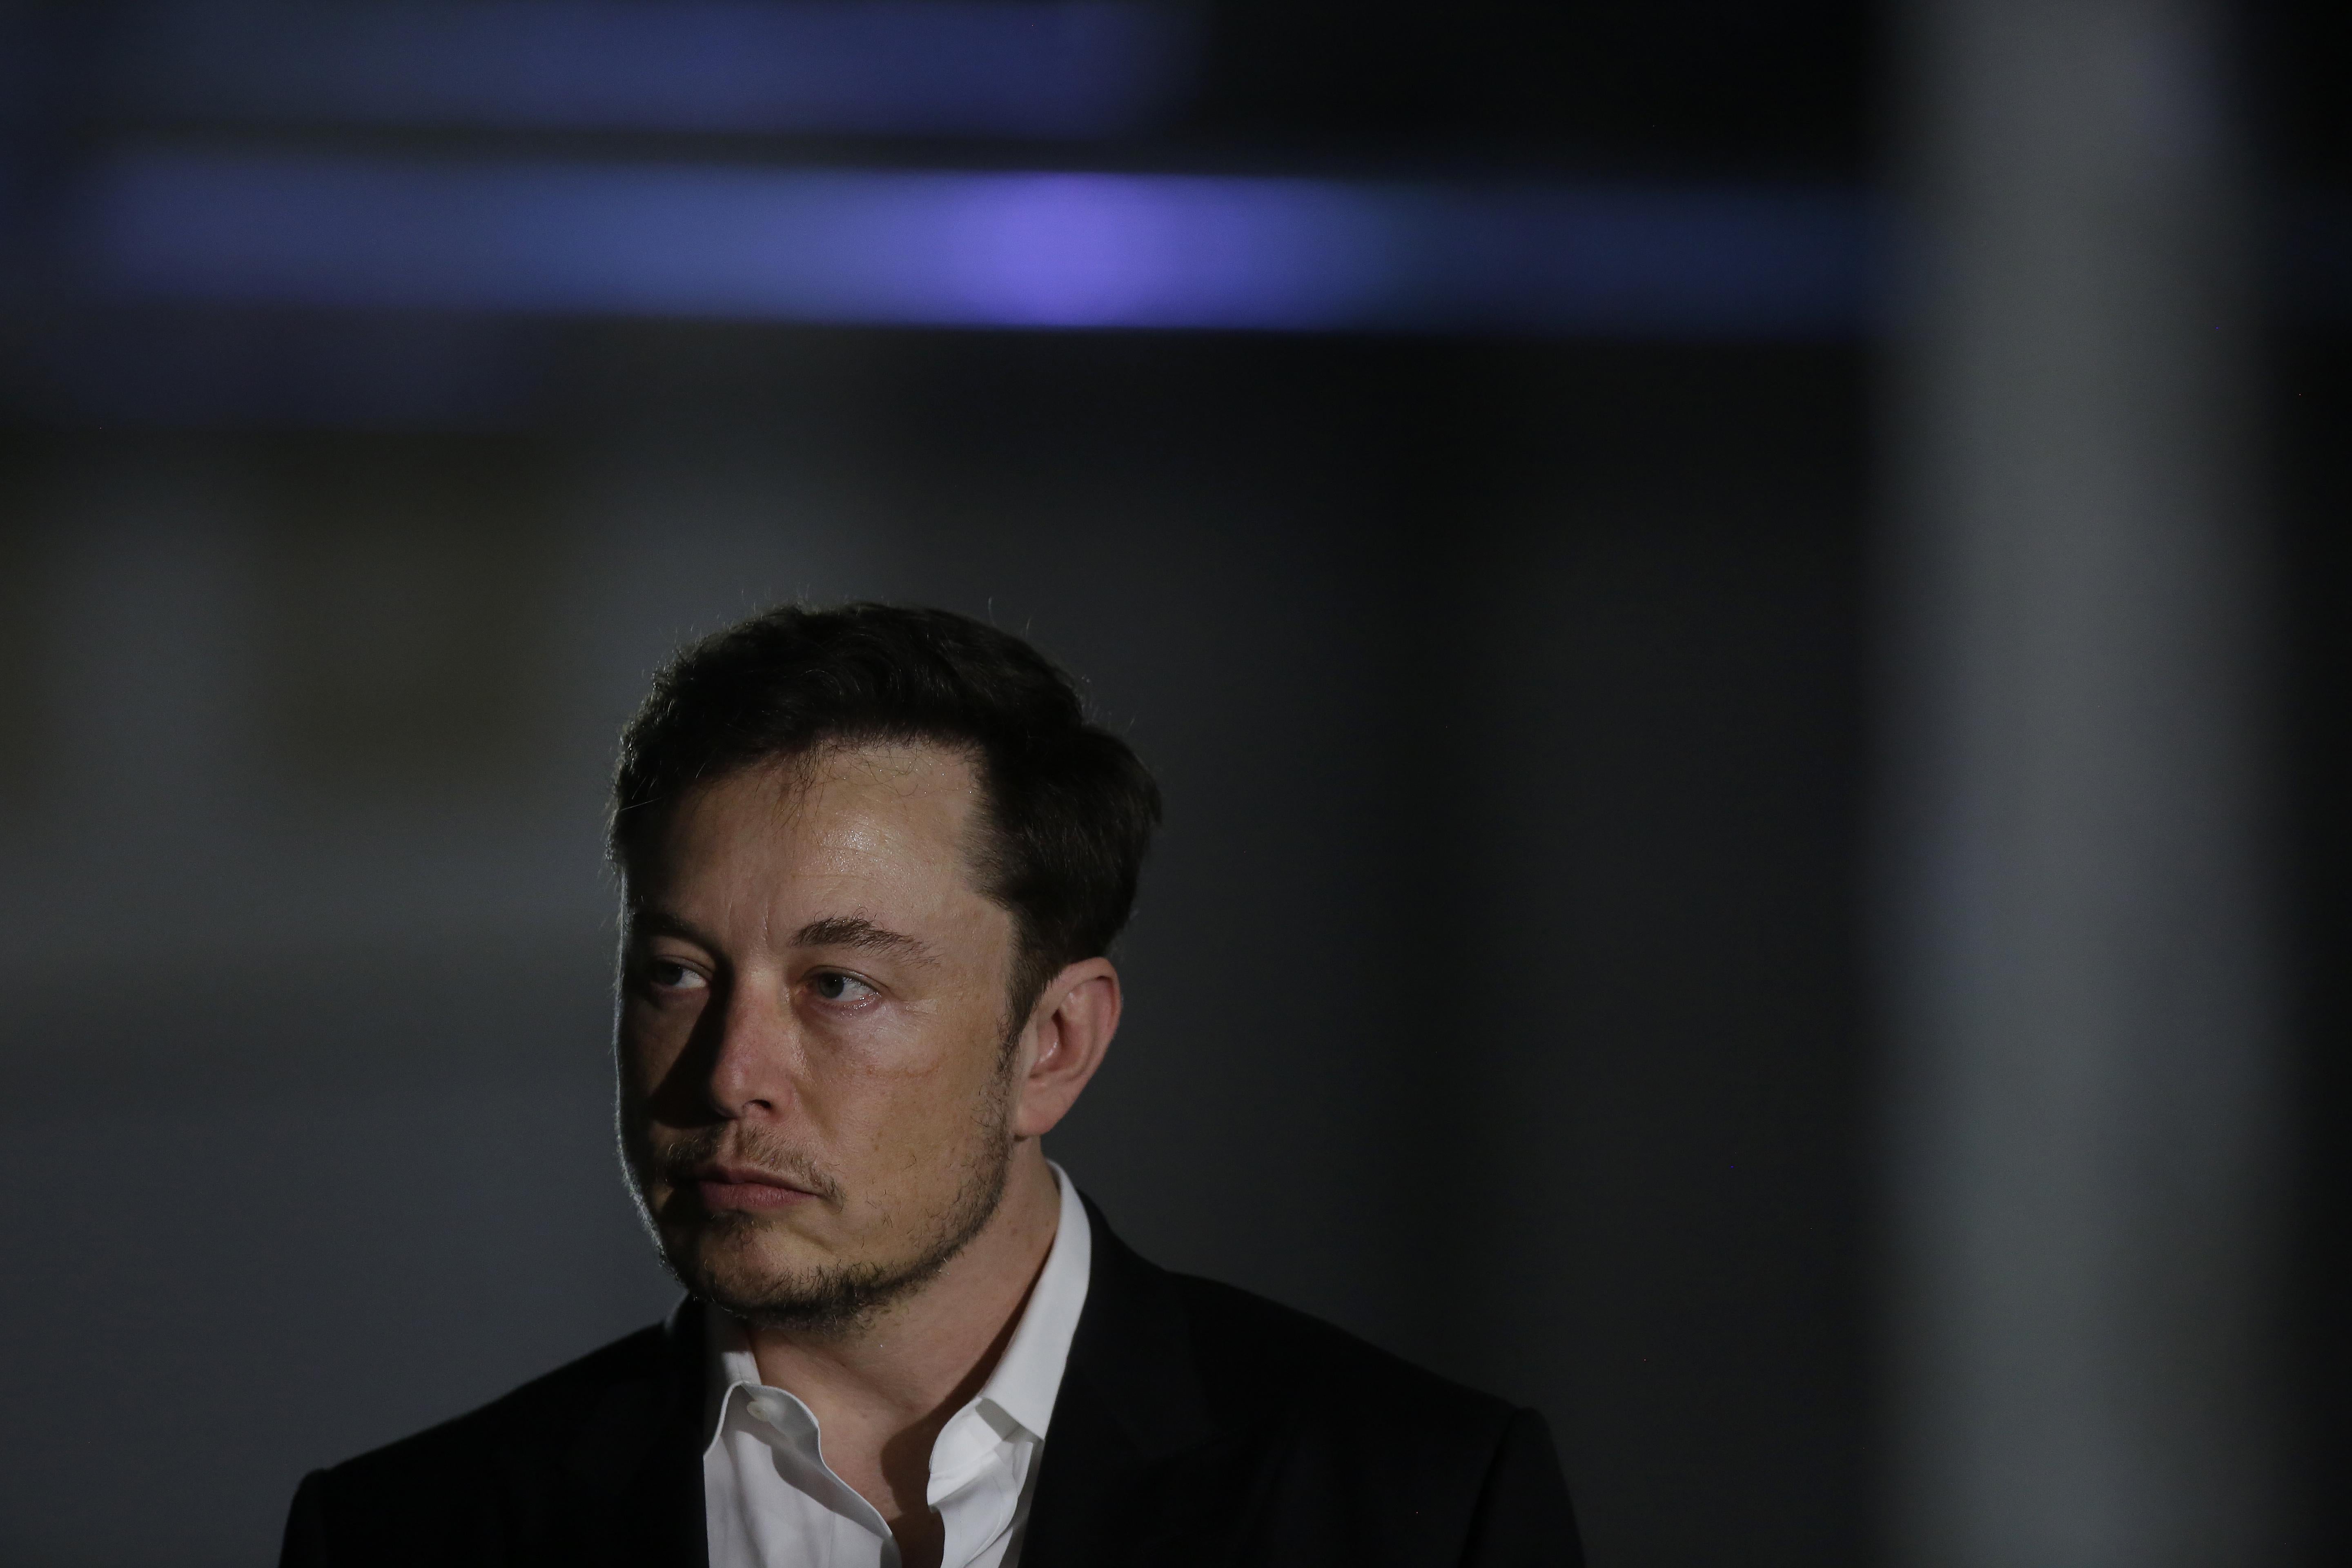 Elon Musk listens as Chicago Mayor Rahm Emanuel talks about constructing a high speed transit tunnel on June 14, 2018 in Chicago Illinois.